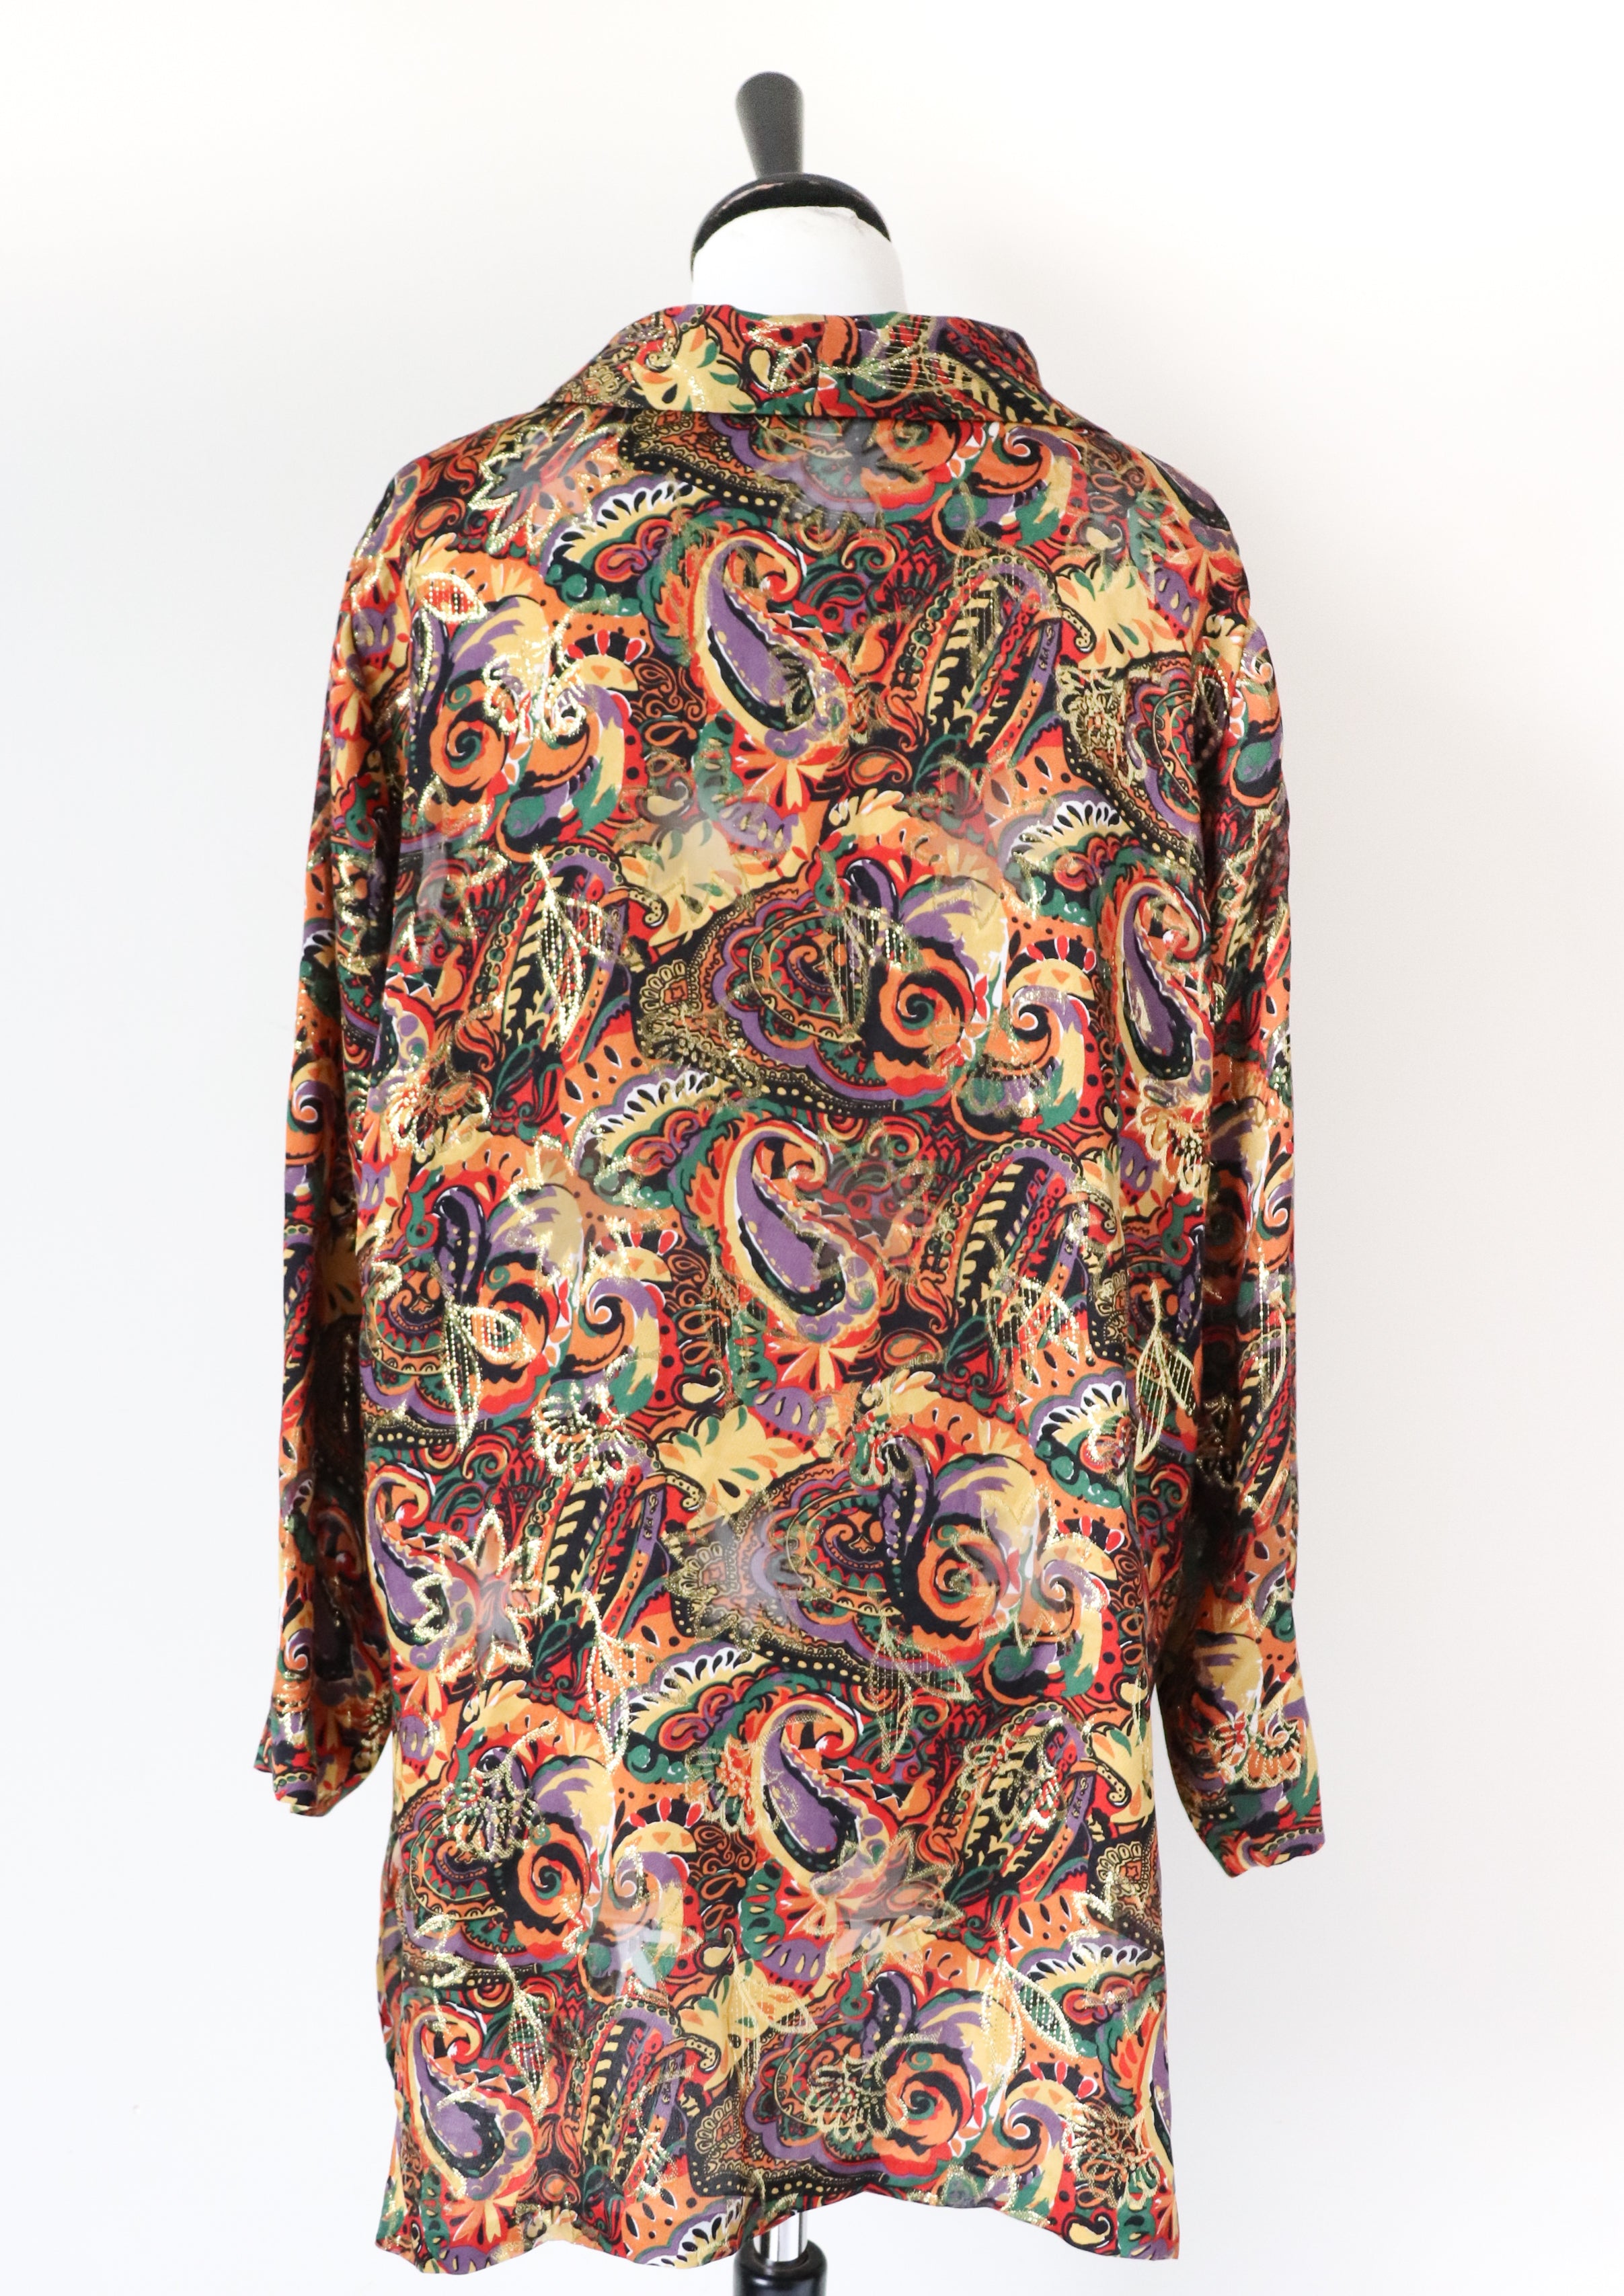 Coverall Silk Cardigan - See-Through - Sparkly Gold Paisley Pattern - Vintage - L / UK 14